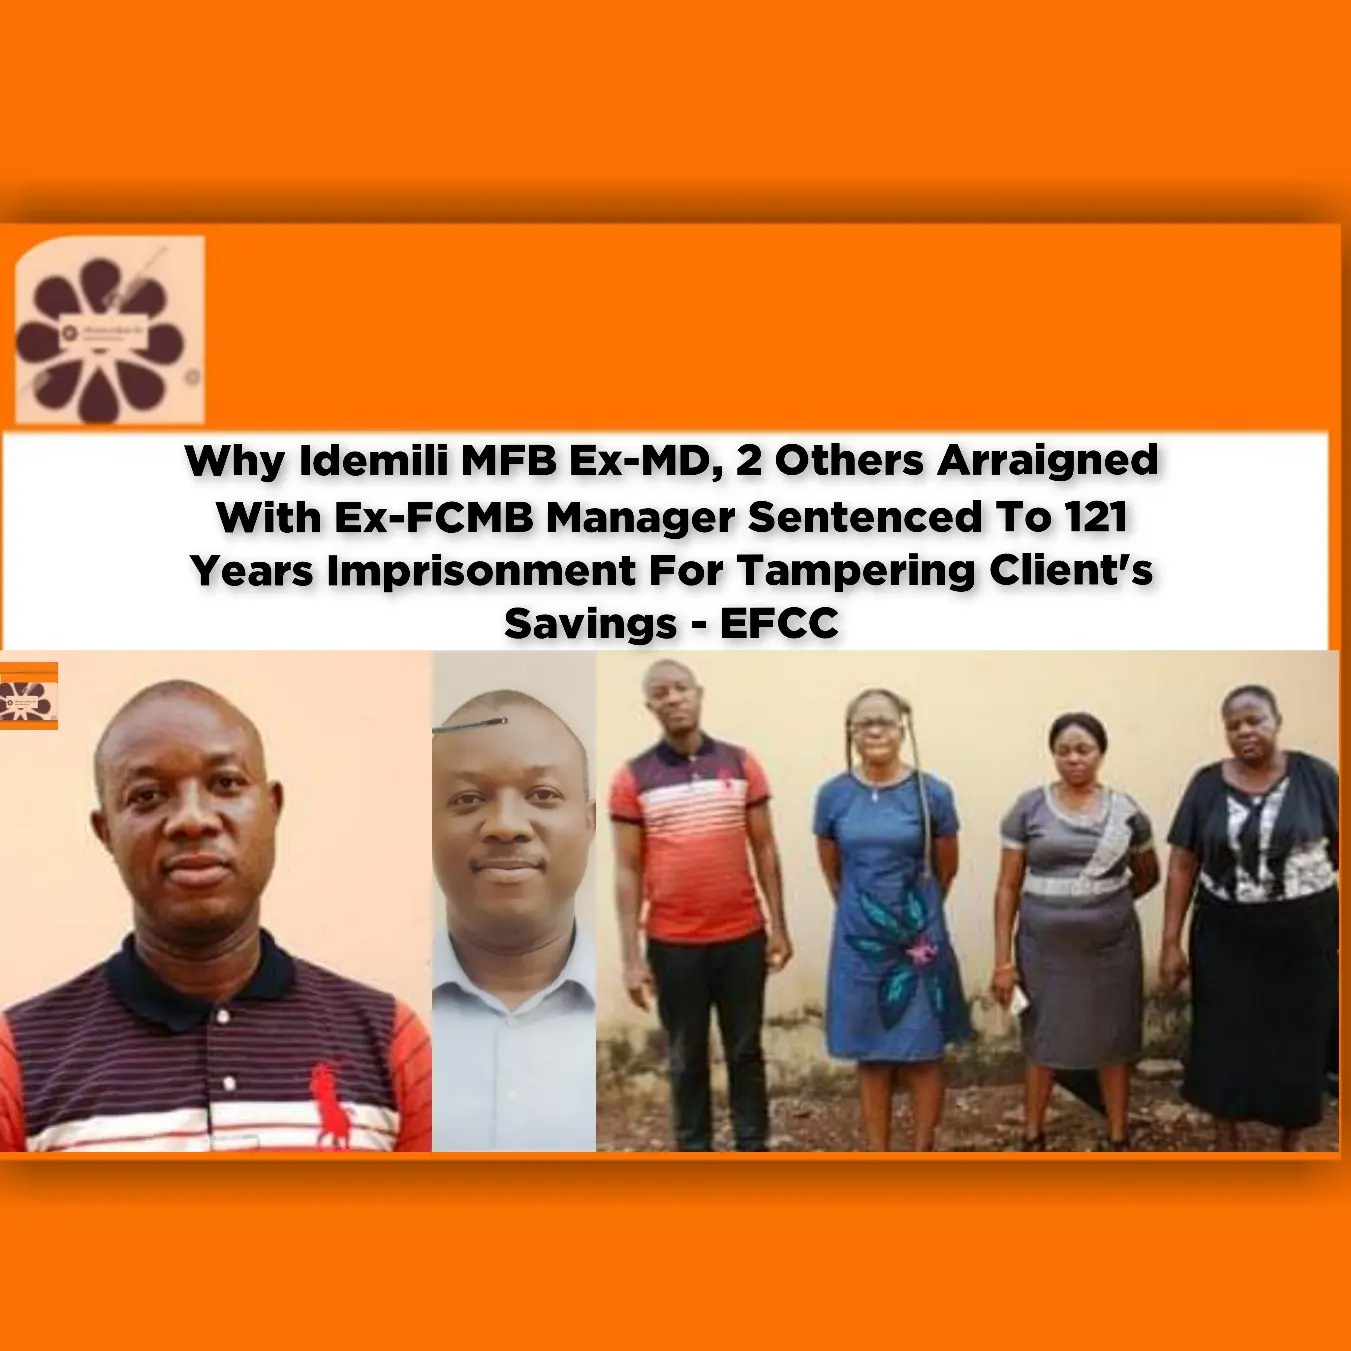 Why Idemili MFB Ex-MD, 2 Others Arraigned With Ex-FCMB Manager Sentenced To 121 Years Imprisonment For Tampering Client's Savings - EFCC ~ OsazuwaAkonedo #SirVictorEfosaUwaifo